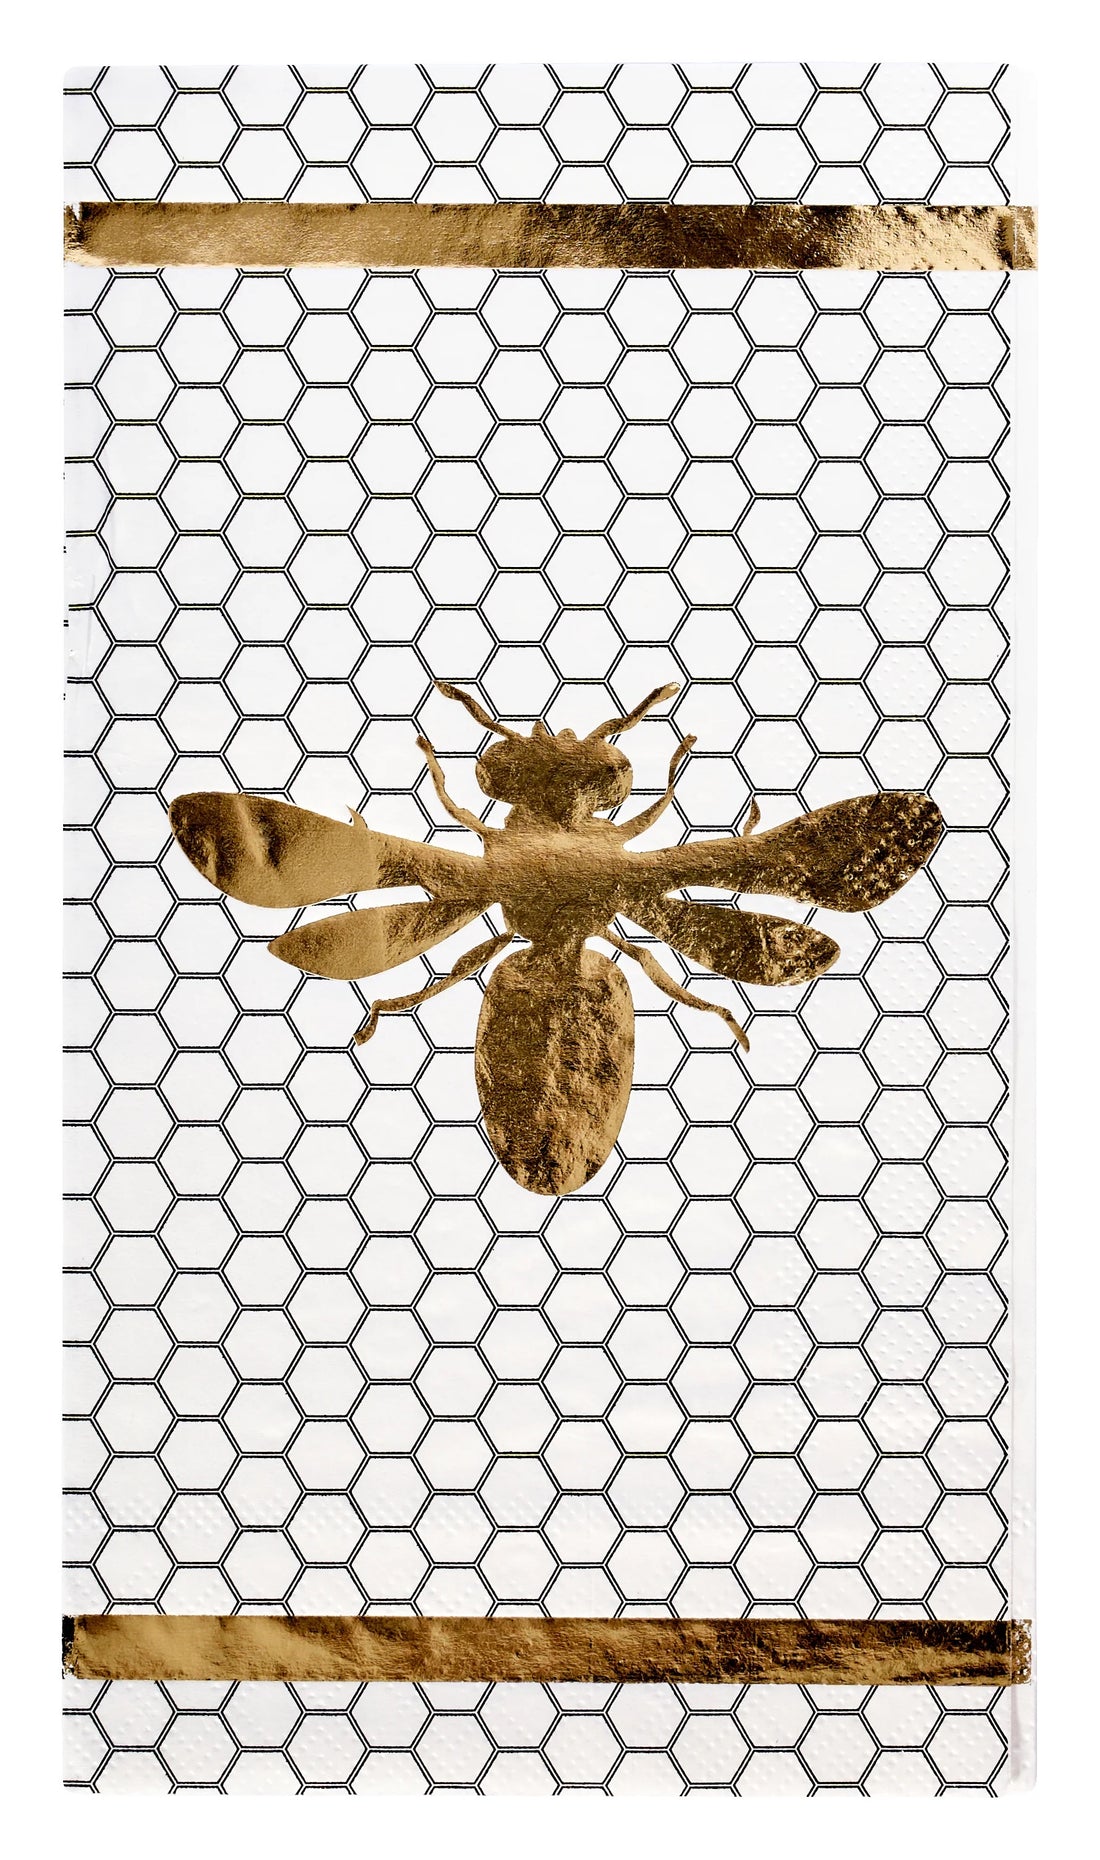 Paper guest towel napkins featuring a gold bee design. Elevate your party with HoneyBee Paper Guest Towel Napkins. Ideal for events and gatherings. From Party Social, your go-to for party essentials.